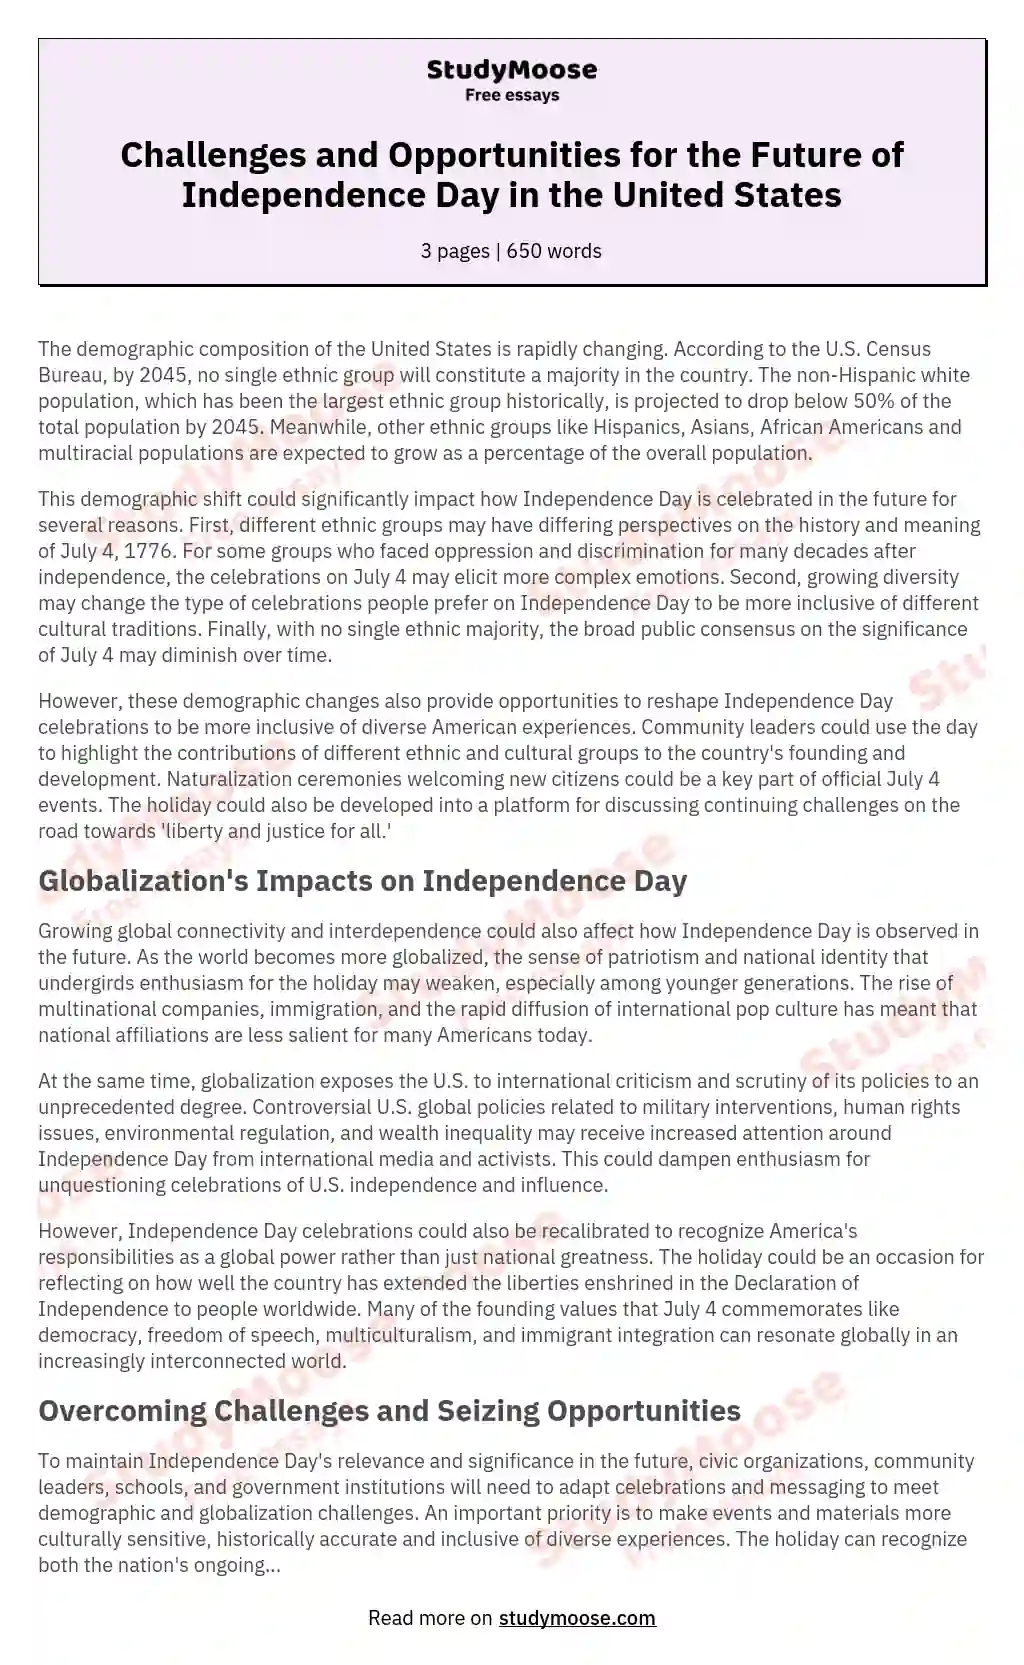 Challenges and Opportunities for the Future of Independence Day in the United States essay